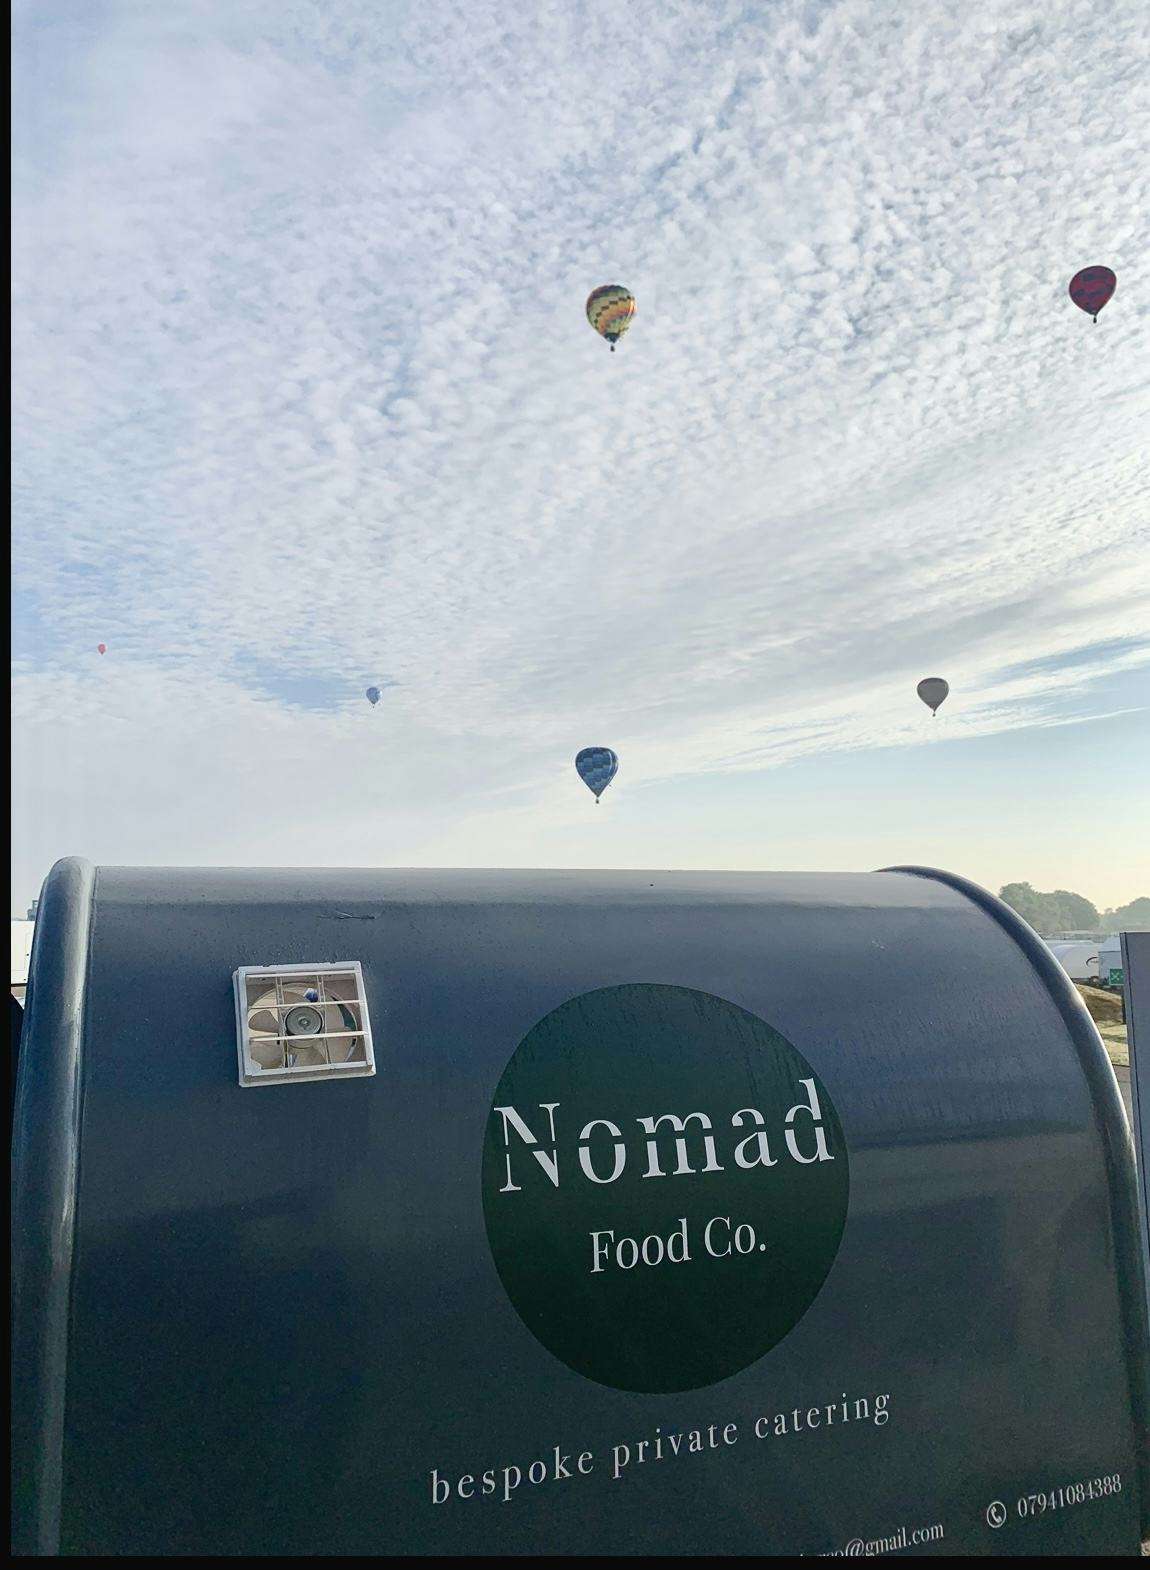 Nomad Catering